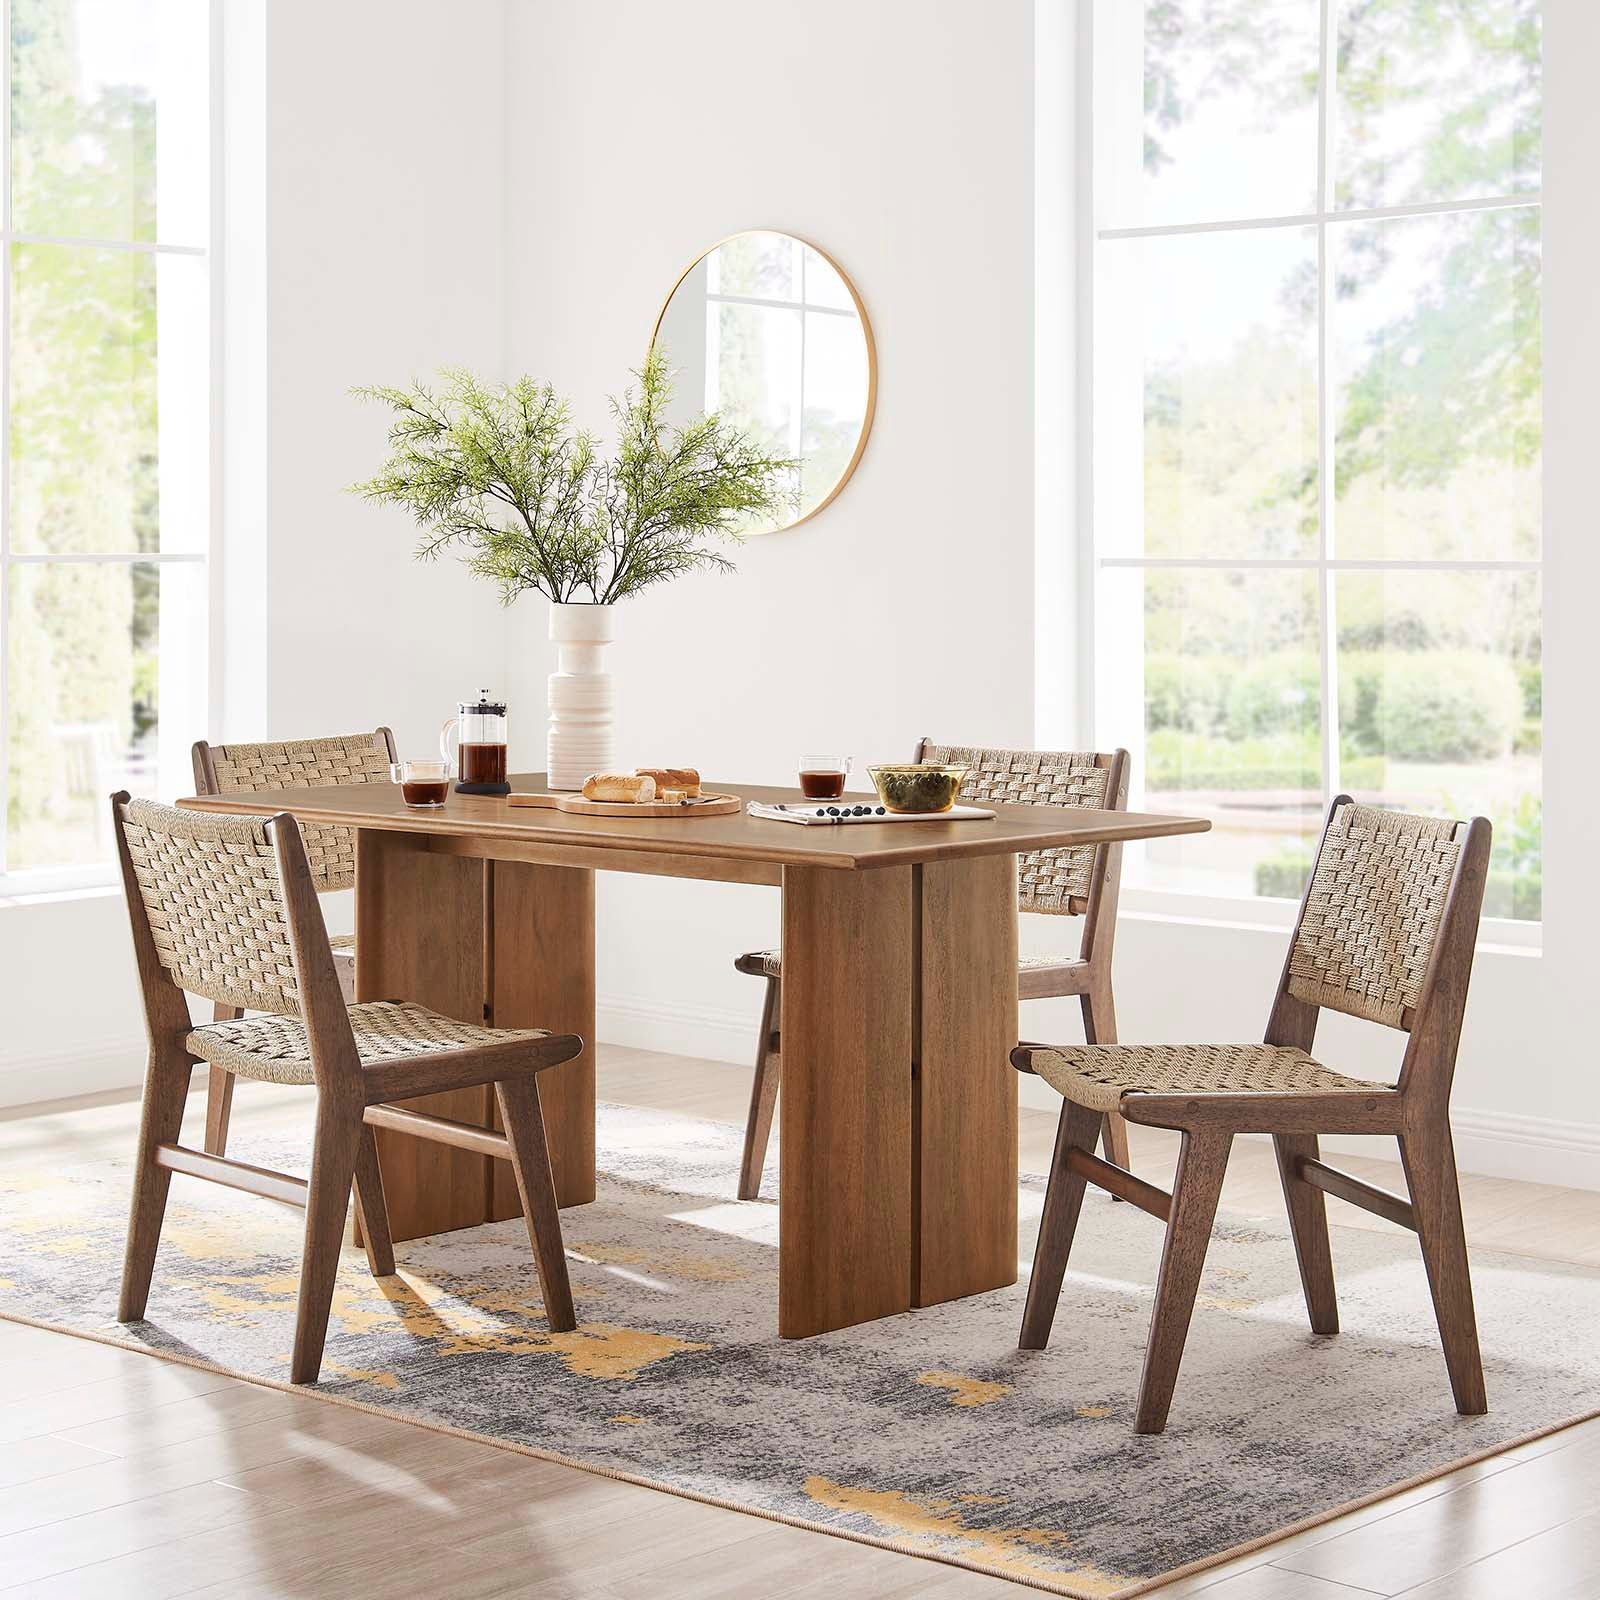 Amistad 60" Wood Dining Table - East Shore Modern Home Furnishings